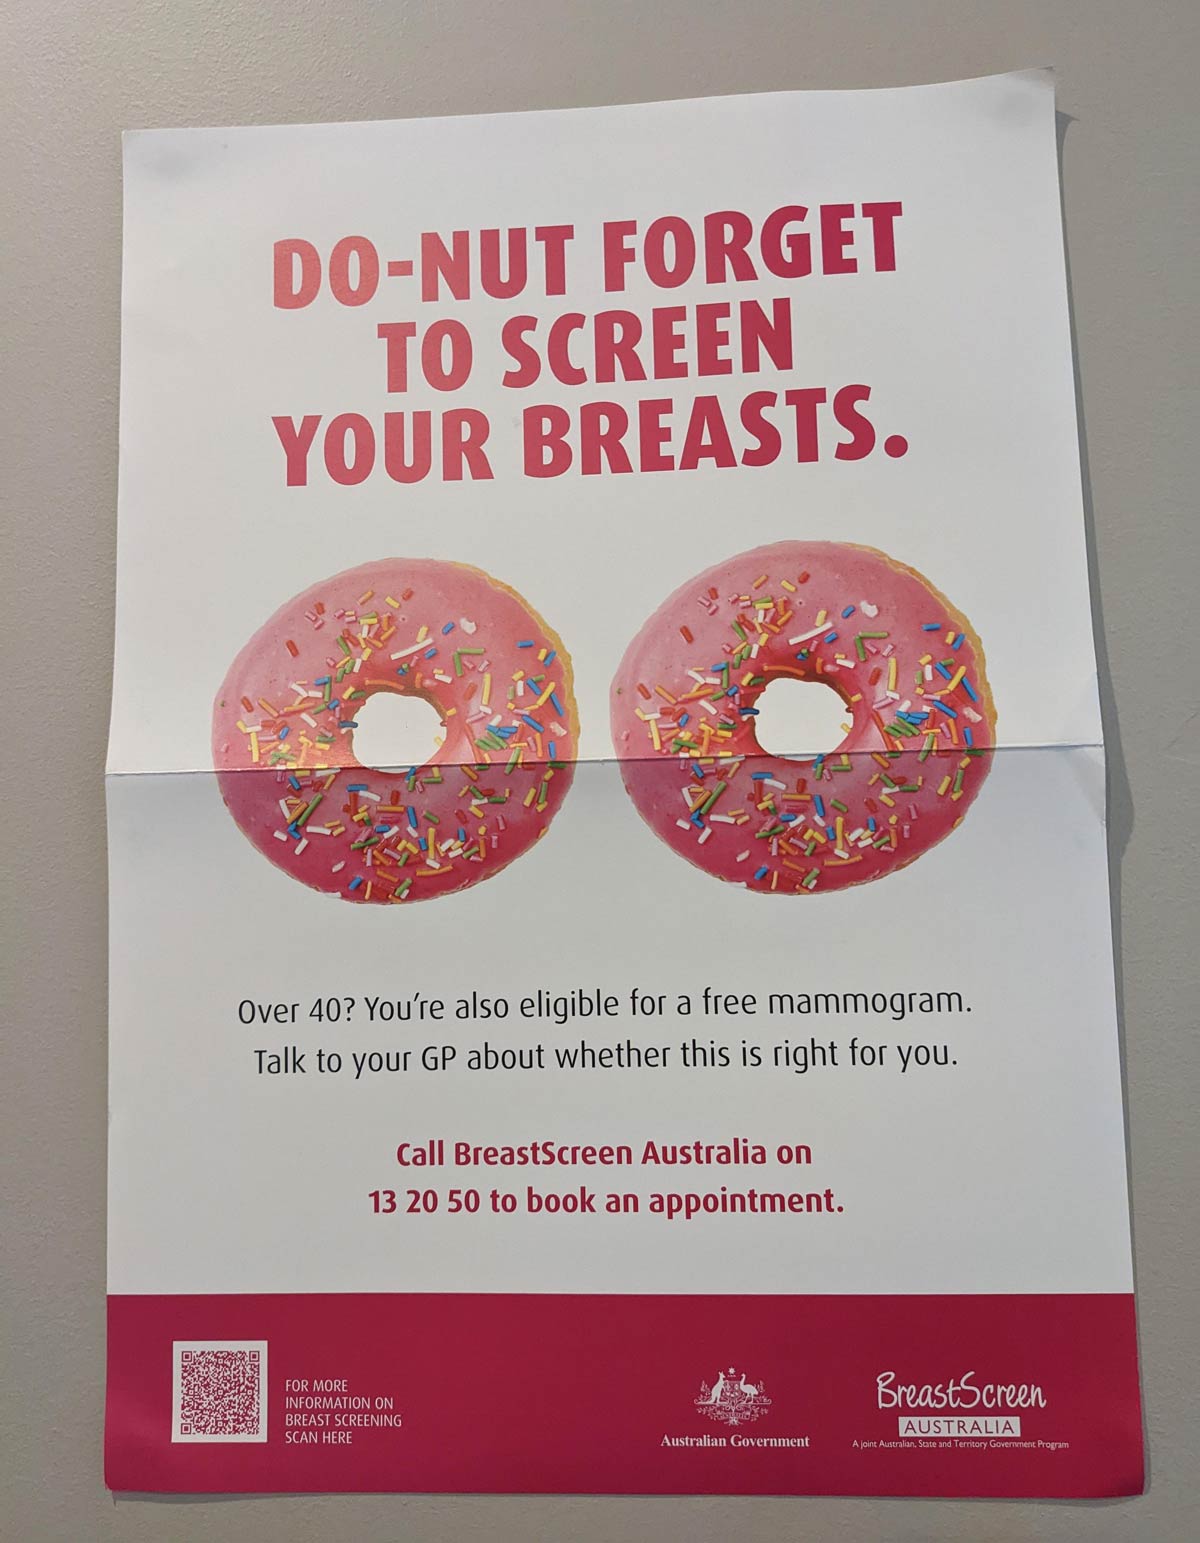 This flyer for breast screening at my doctor's office